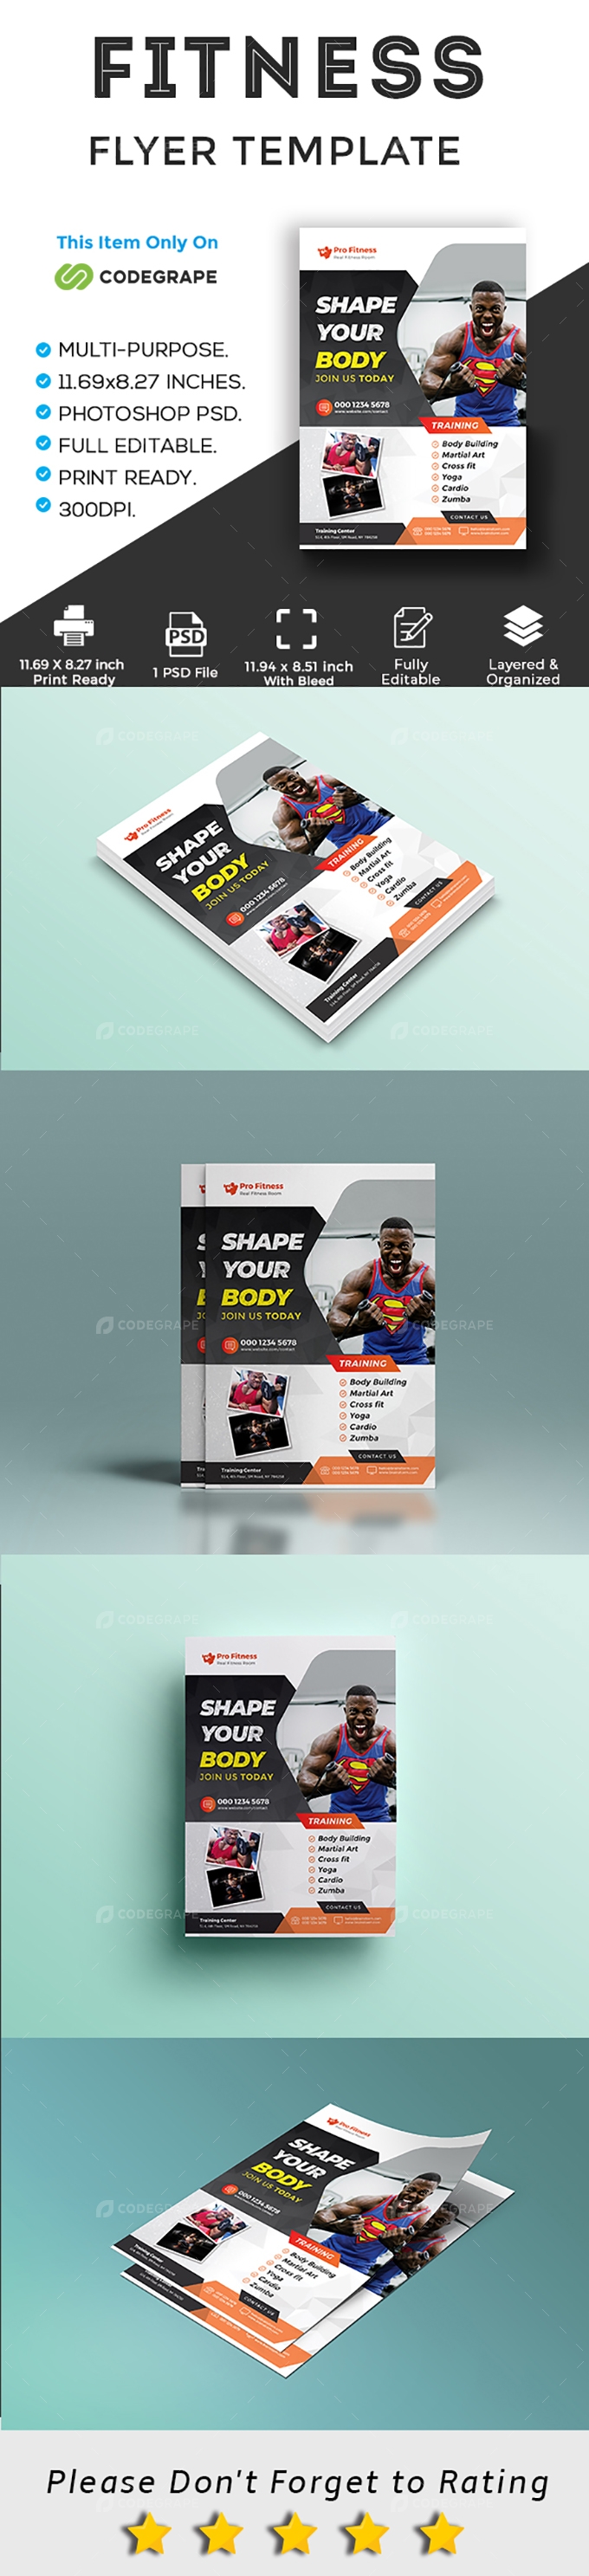 GYM Fitness Flyer Template